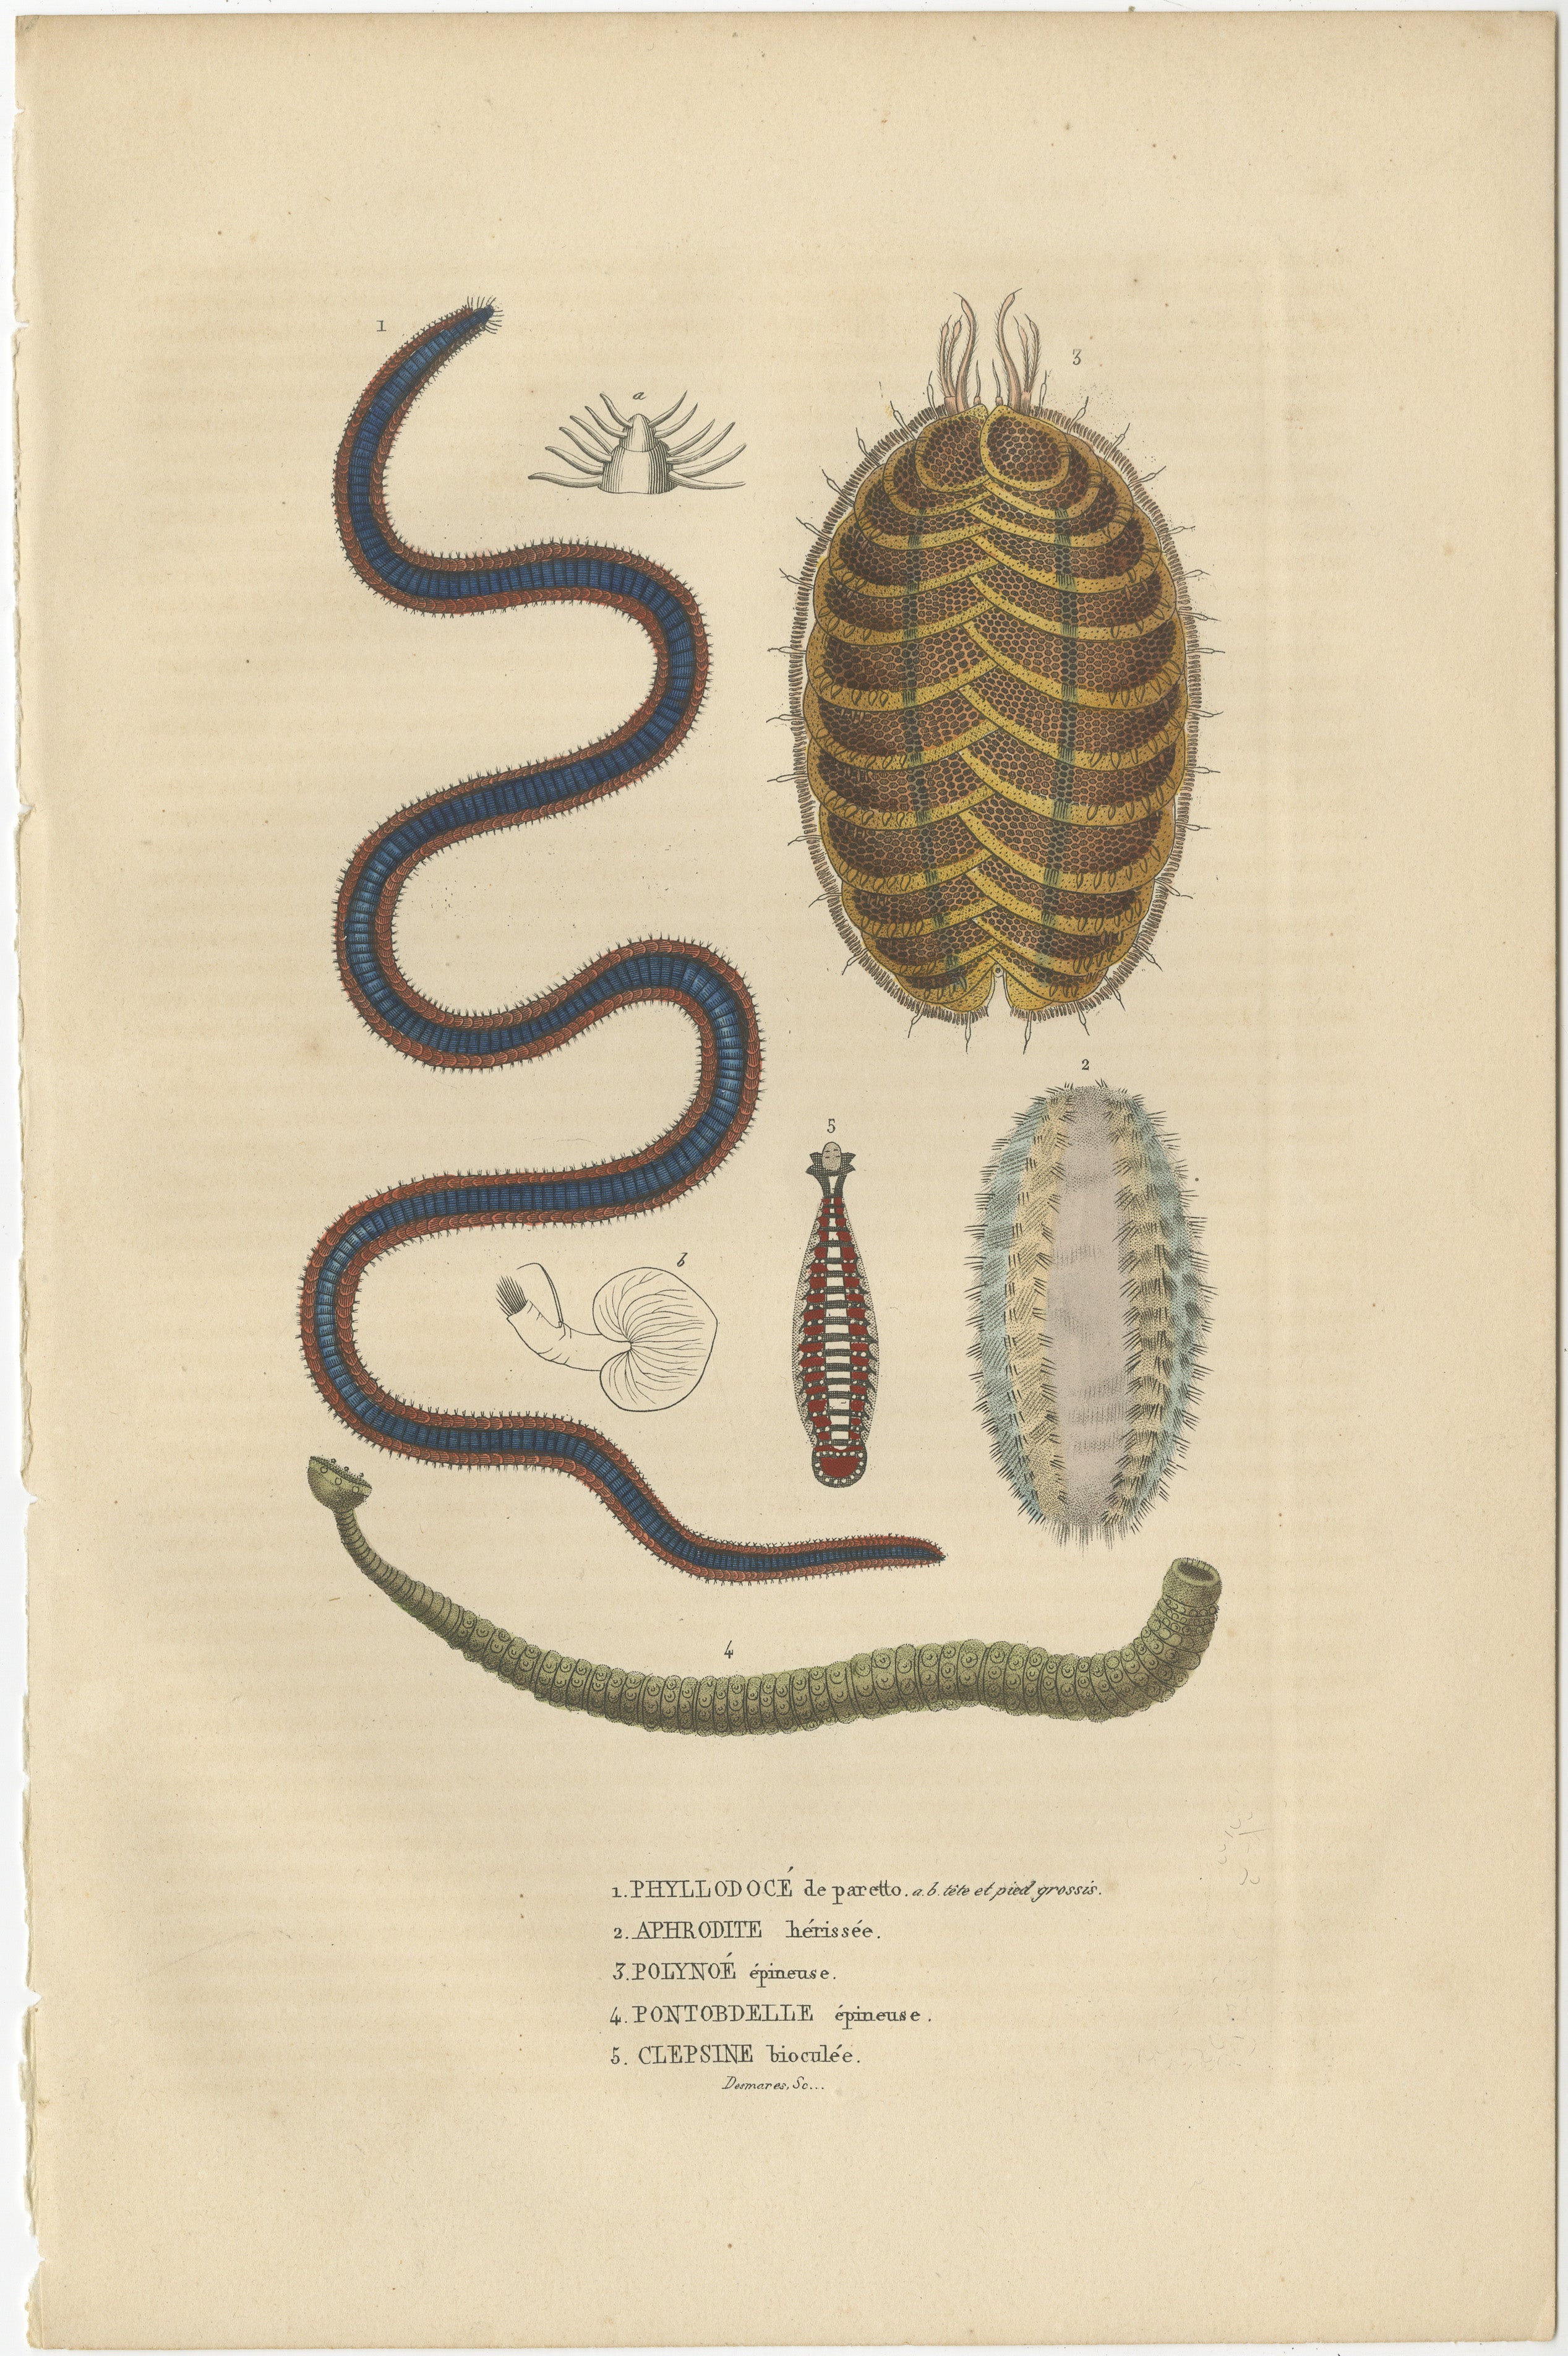 This original antique engraving depicts a variety of marine invertebrates:

1. **Phyllococte de part et d'autre épineux** - This might refer to a type of marine worm or possibly a sea cucumber with protruding spines for defense.

2. **Aperoïte